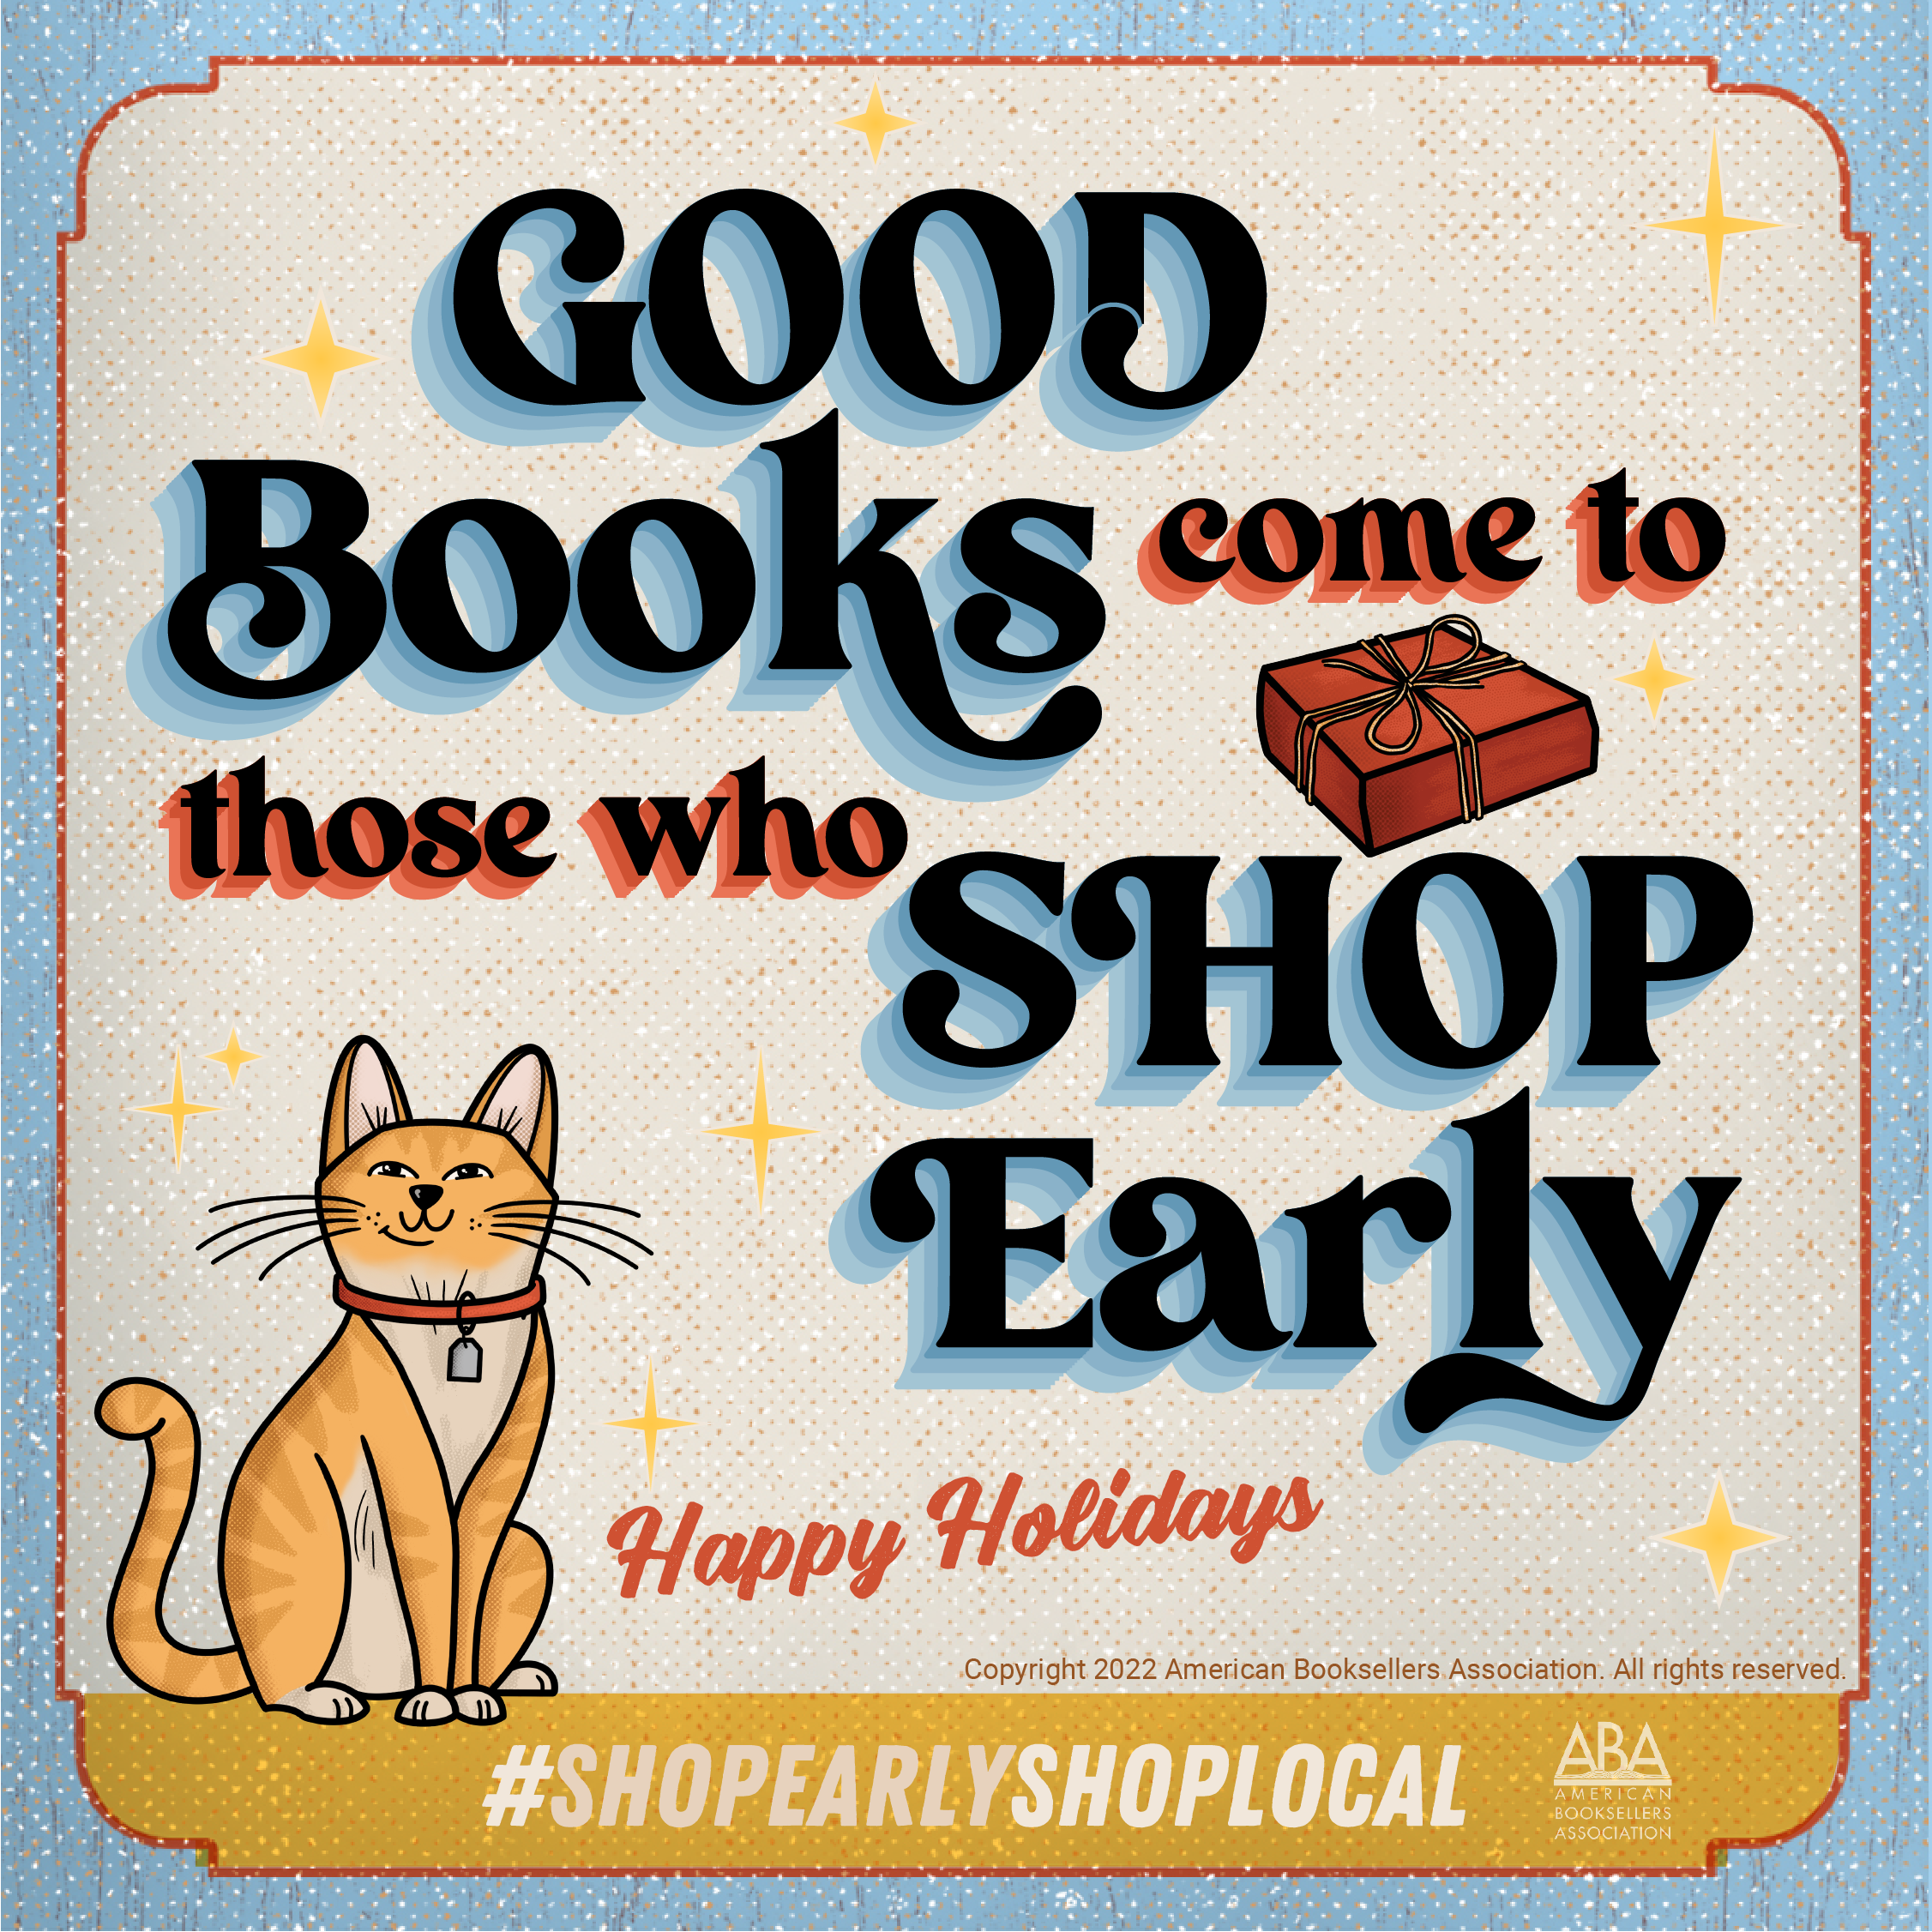 Good books come to those who shop early